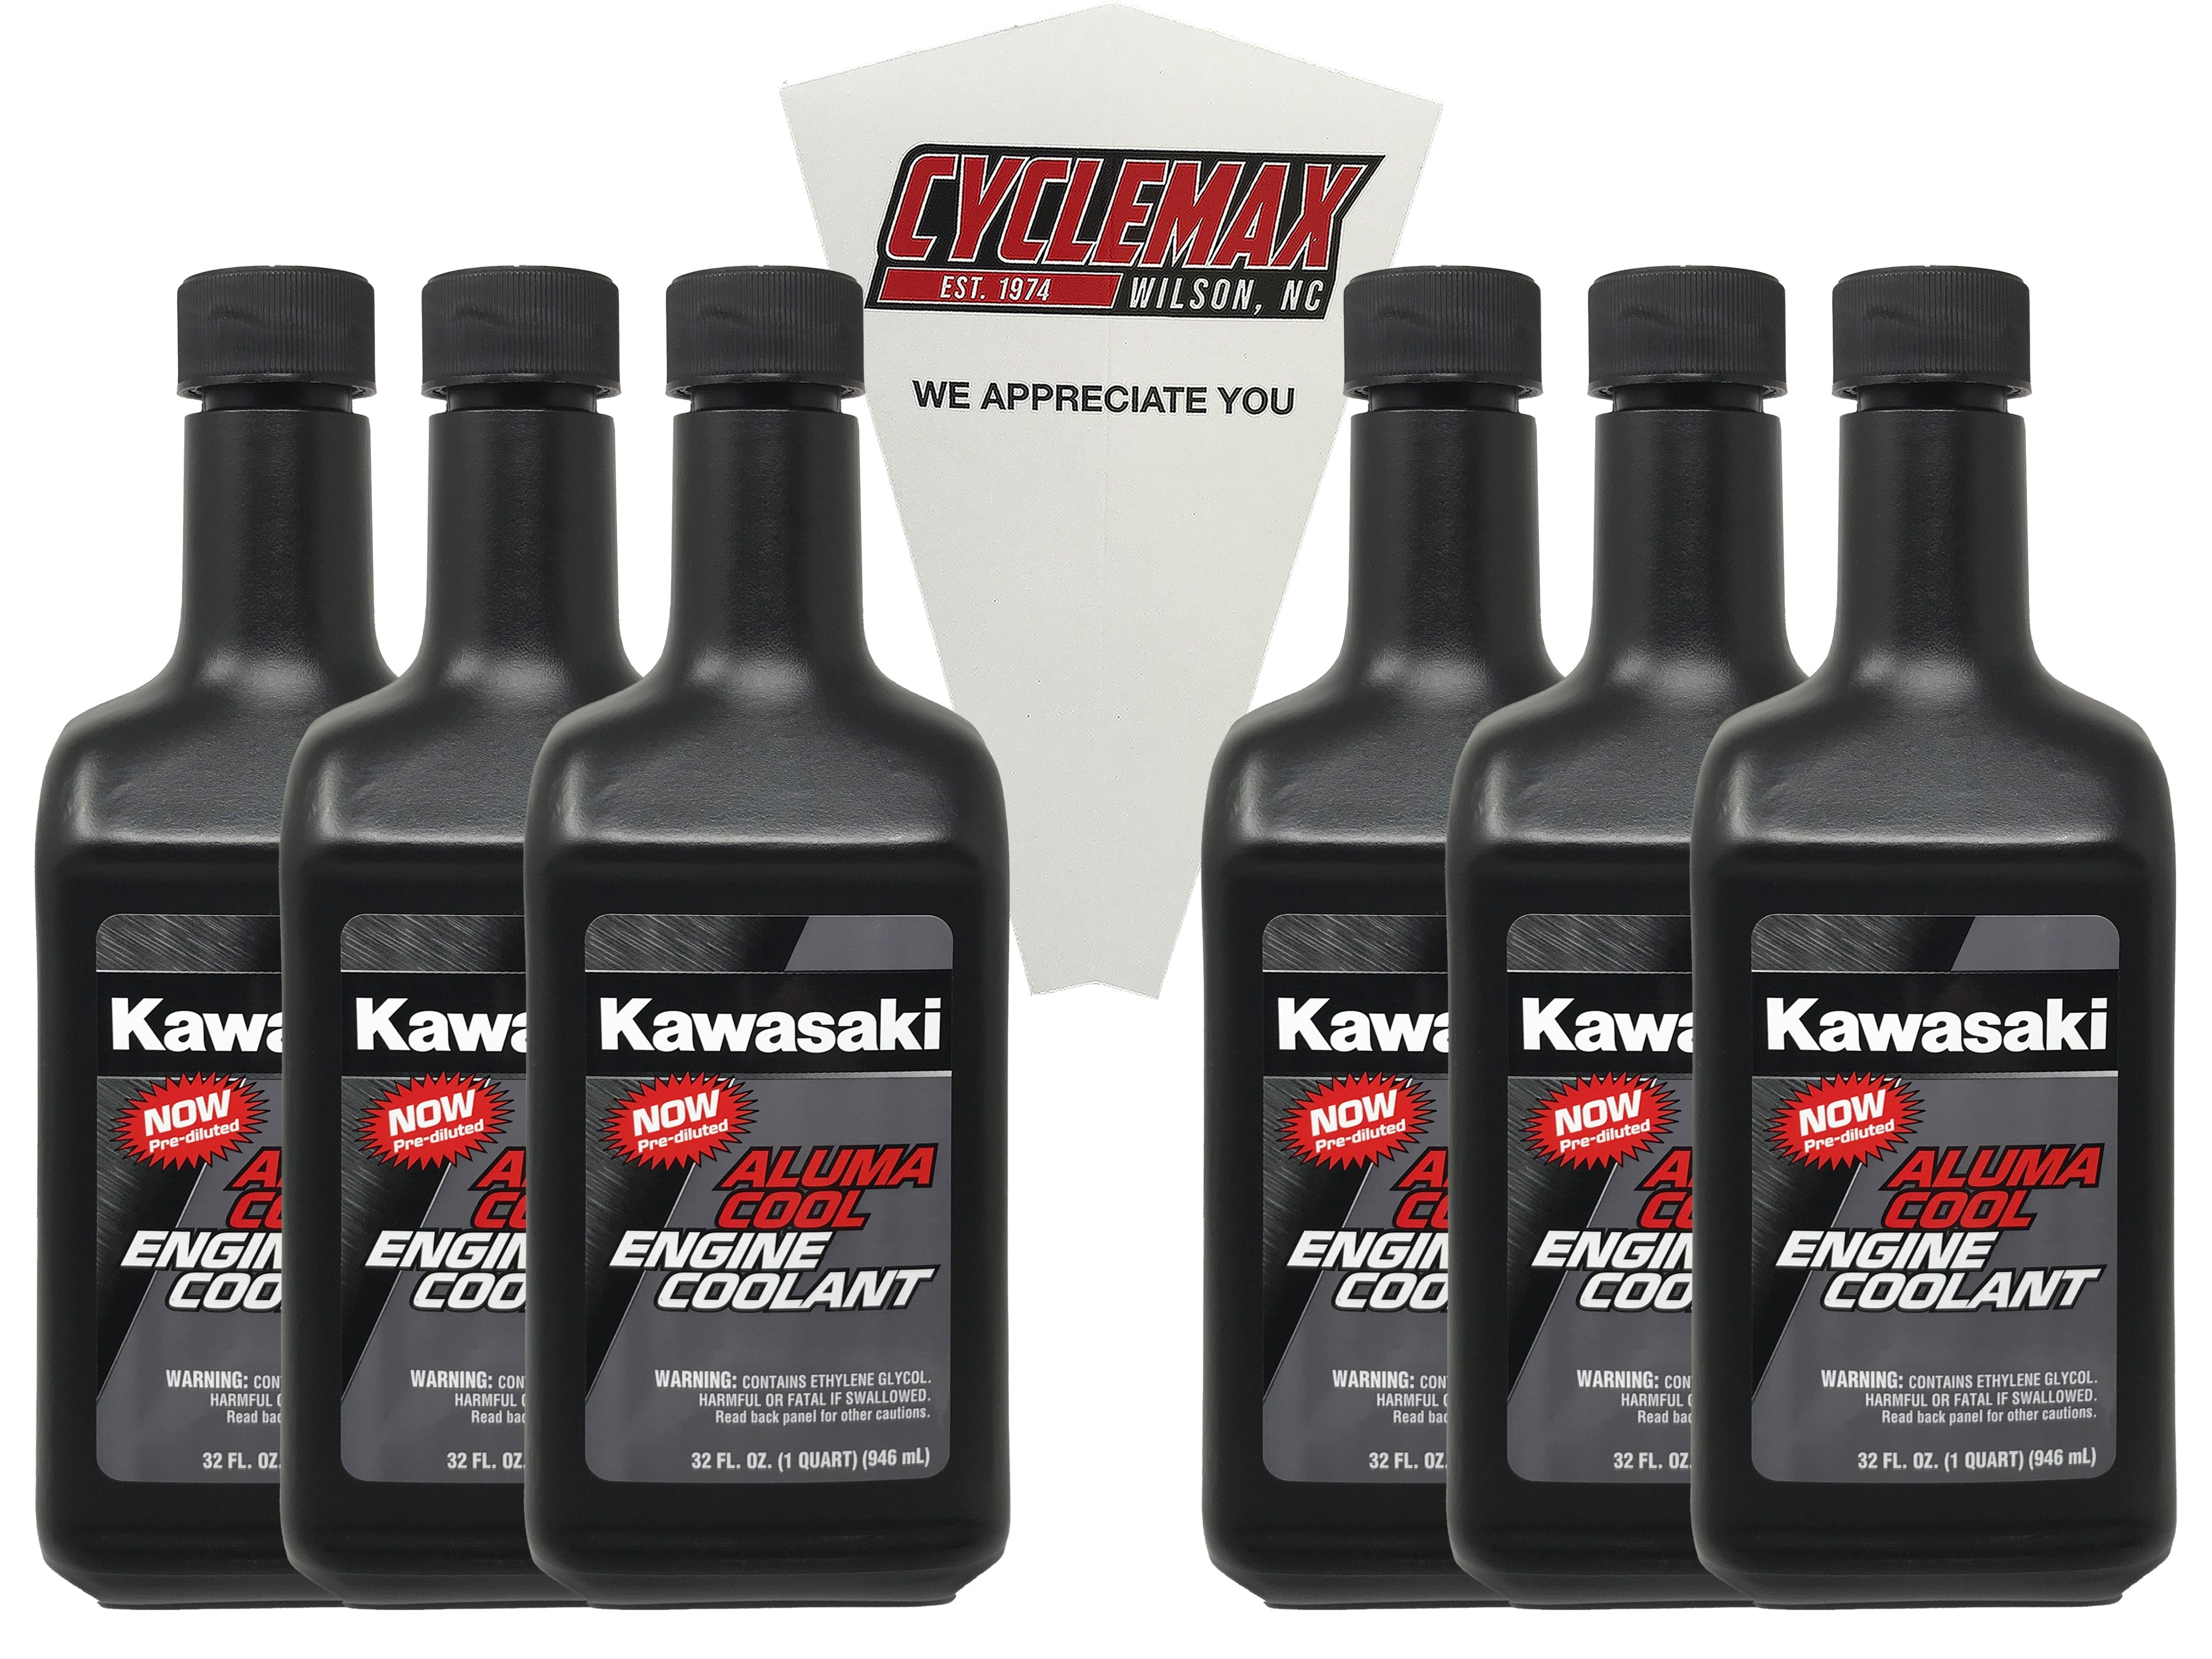 CYCLEMAX Six Pack for Kawasaki Aluma Cool Engine Coolant K61081-004B Contains Six Quarts and a Funnel